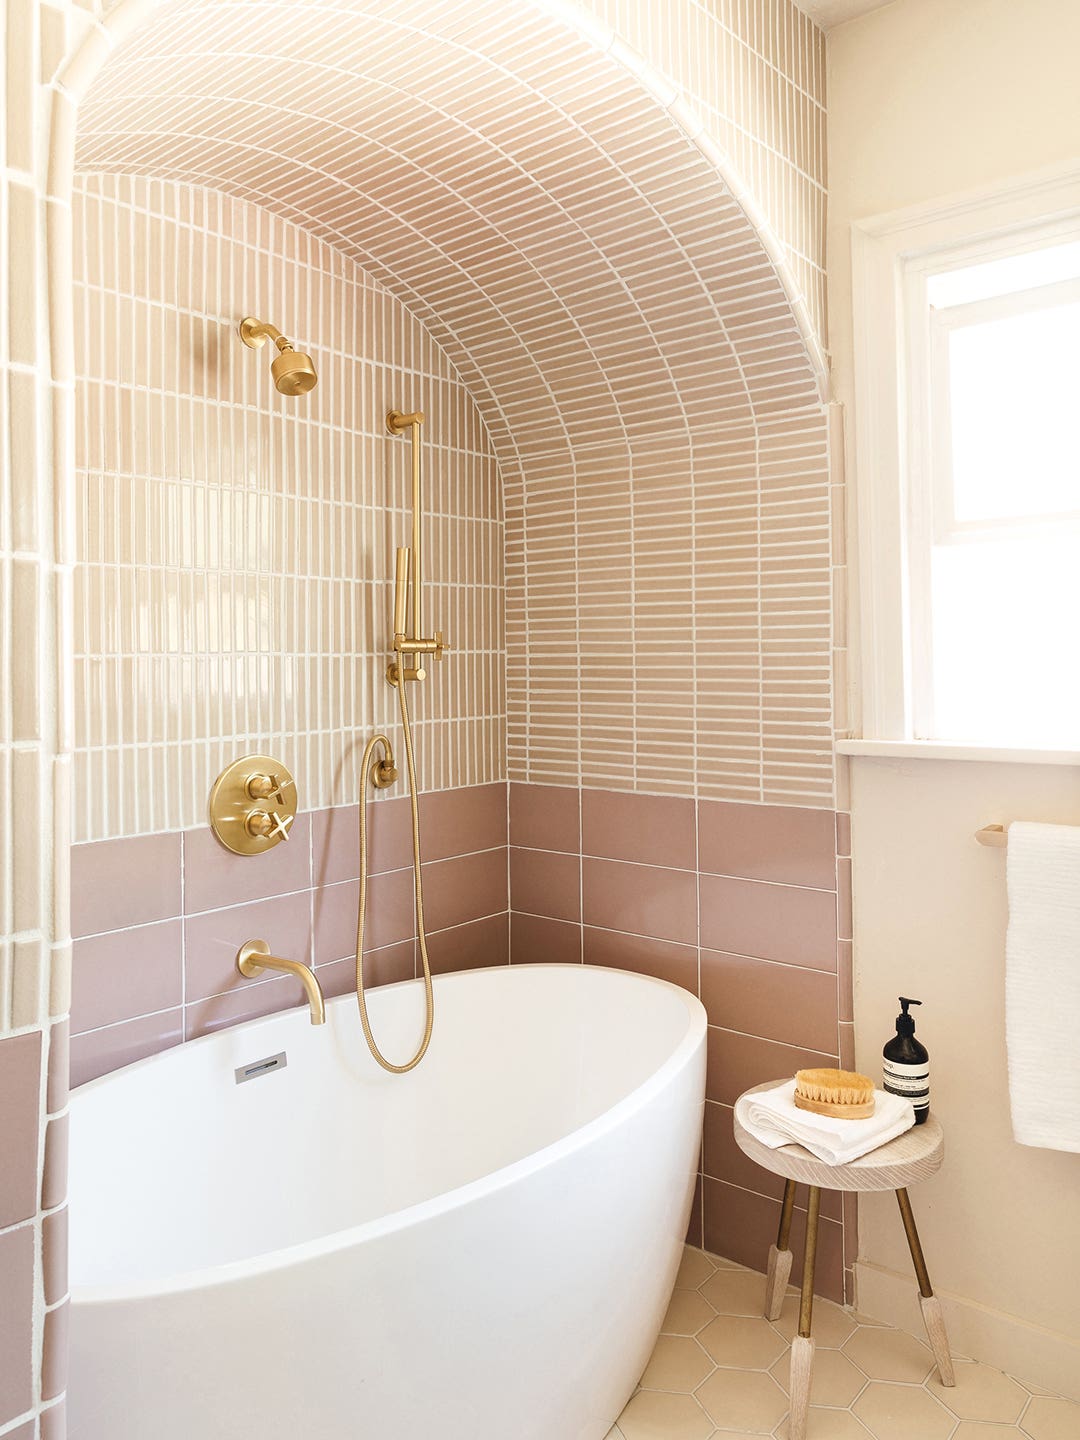 The Addition That Made This Bathroom’s 1920s Archways Feel Right for 2021